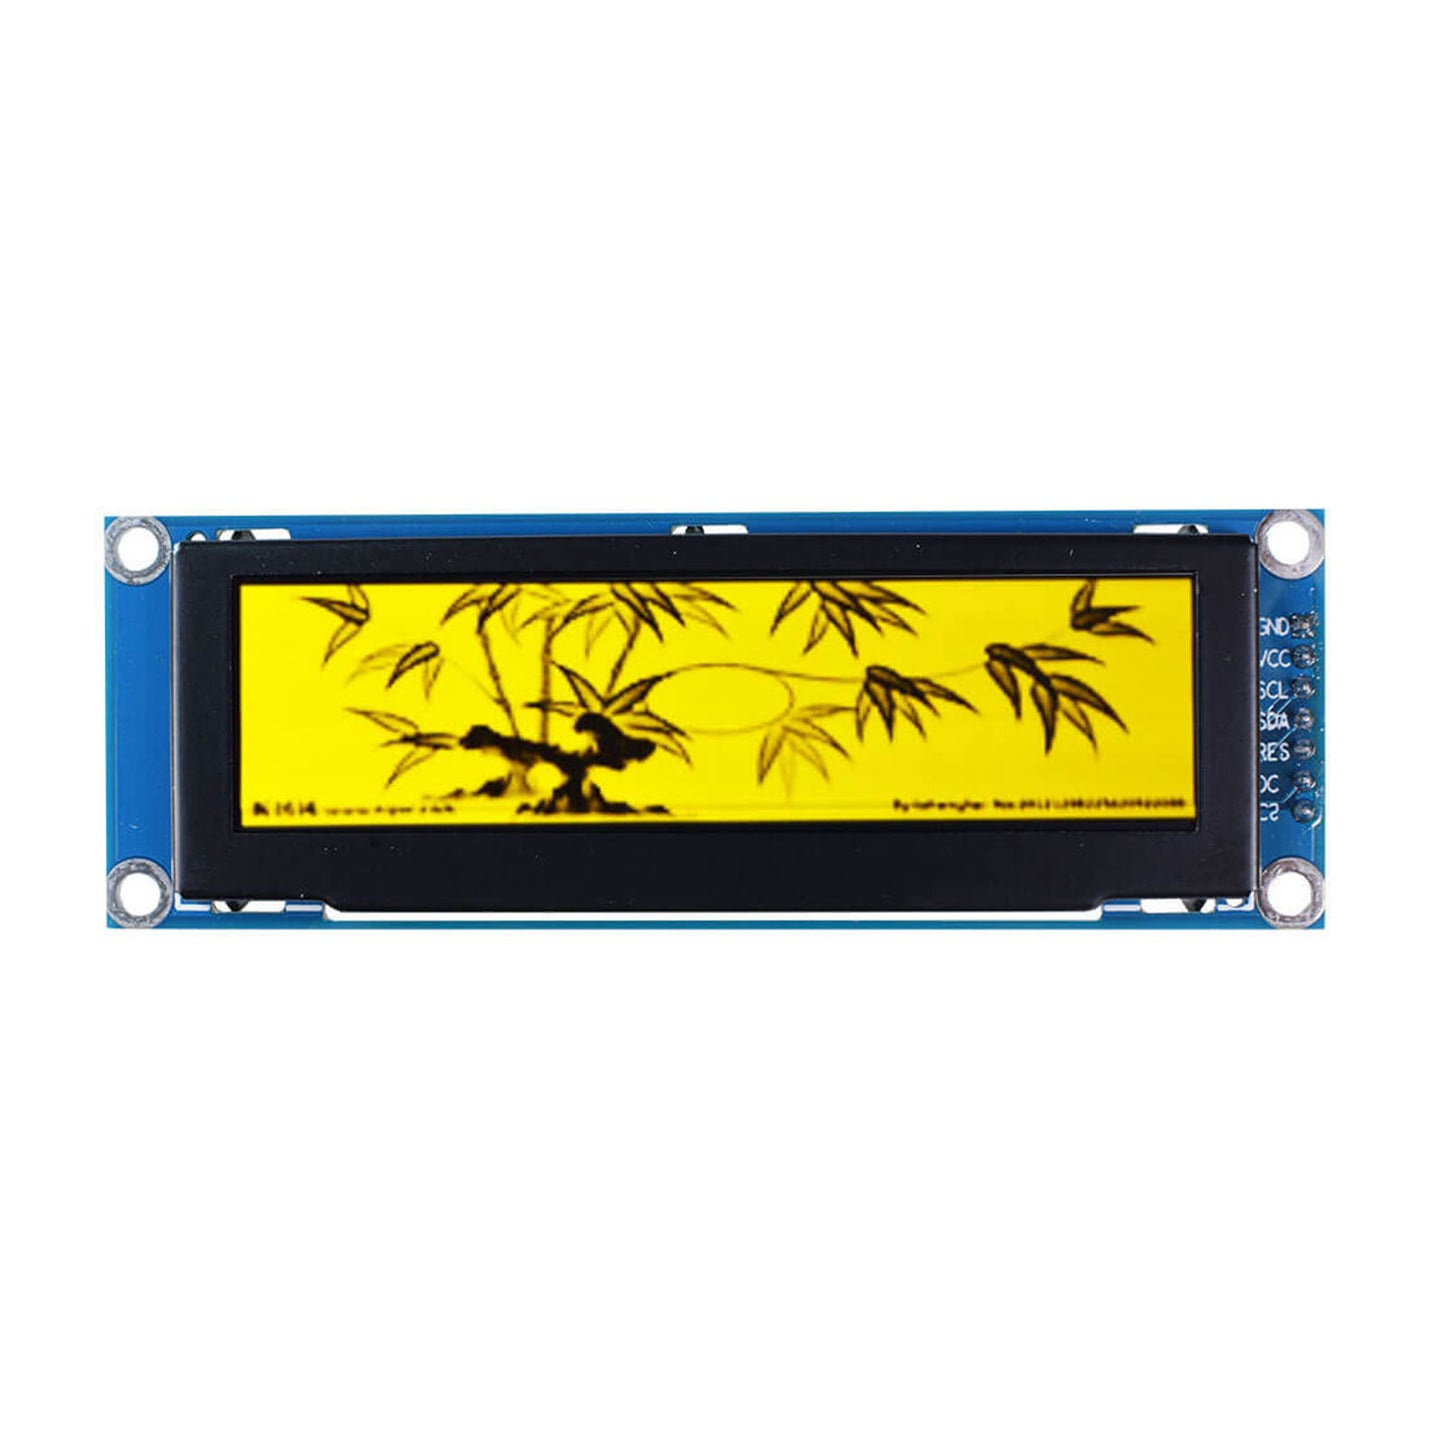 Monochrome yellow OLED display module showing a Chinese-style bamboo painting